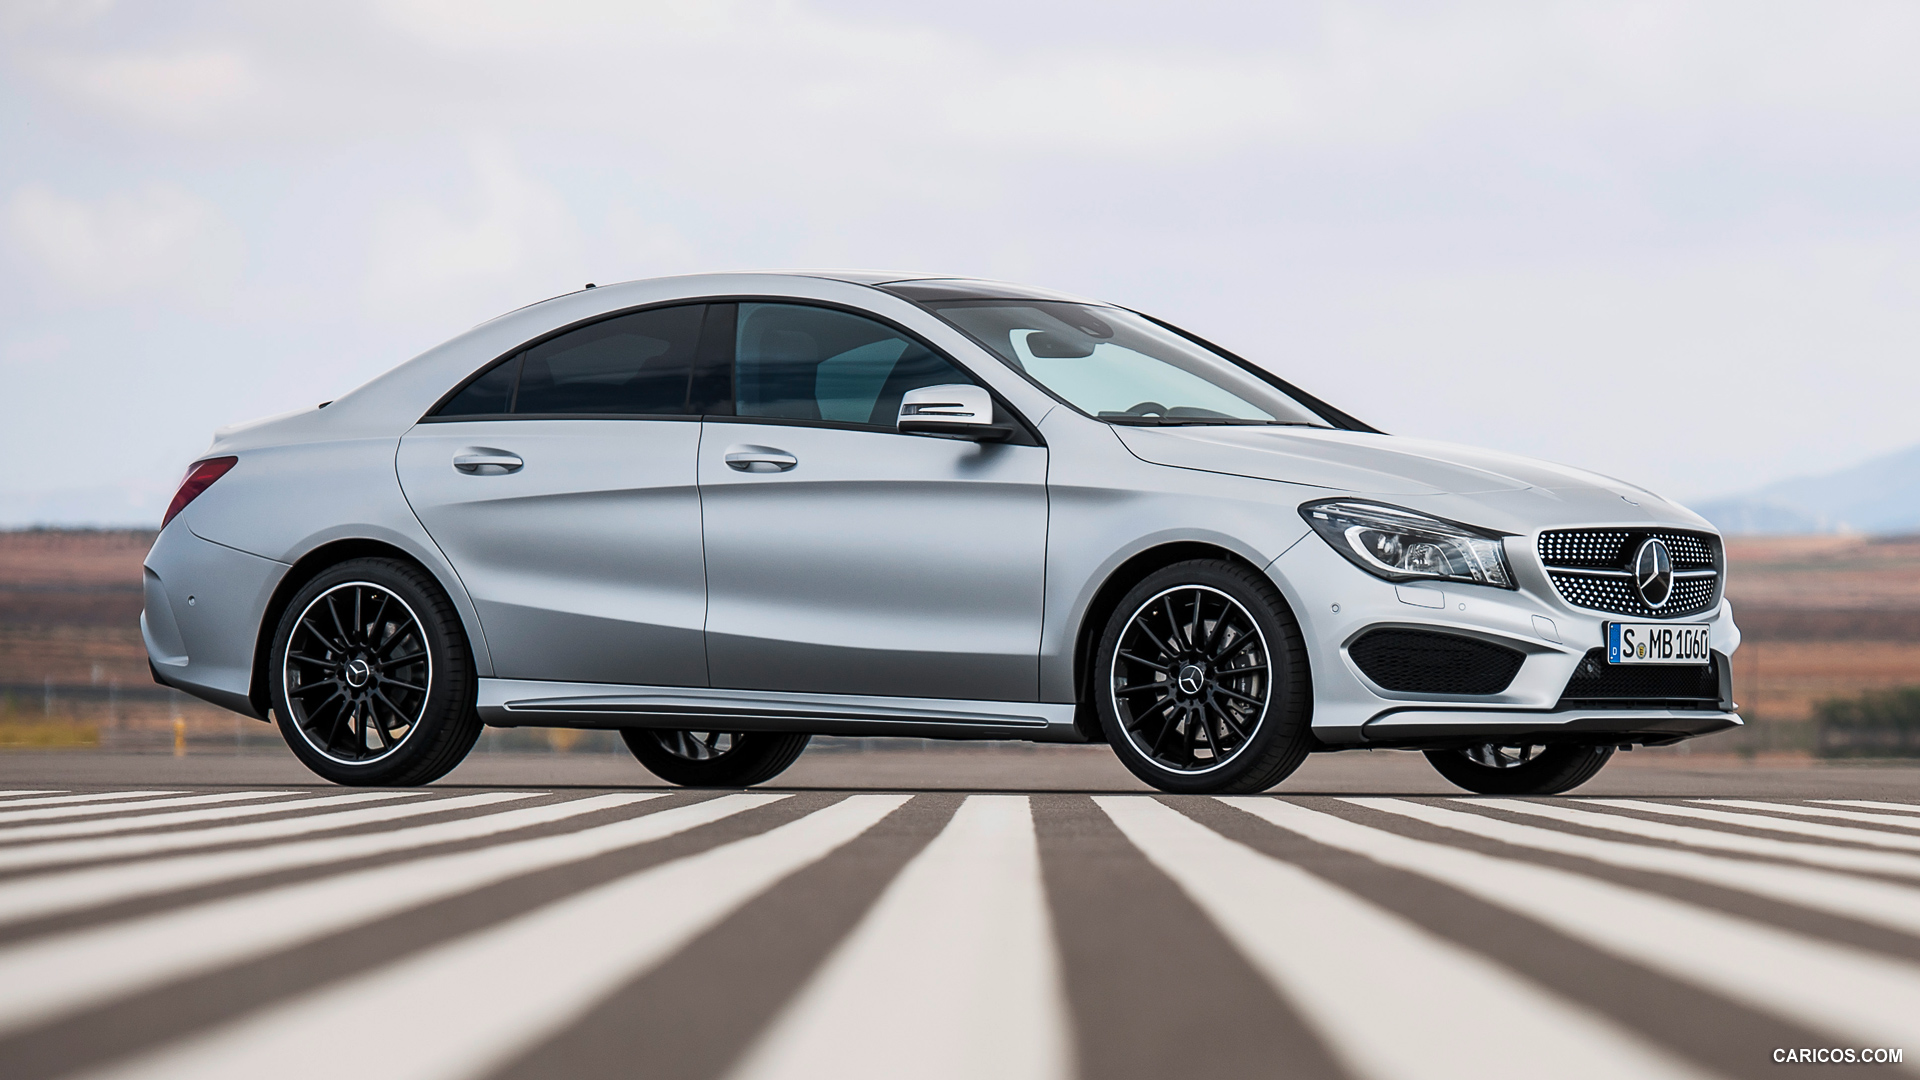 2014 Mercedes-Benz CLA-Class CLA 250 Edition 1 - Front, #12 of 183